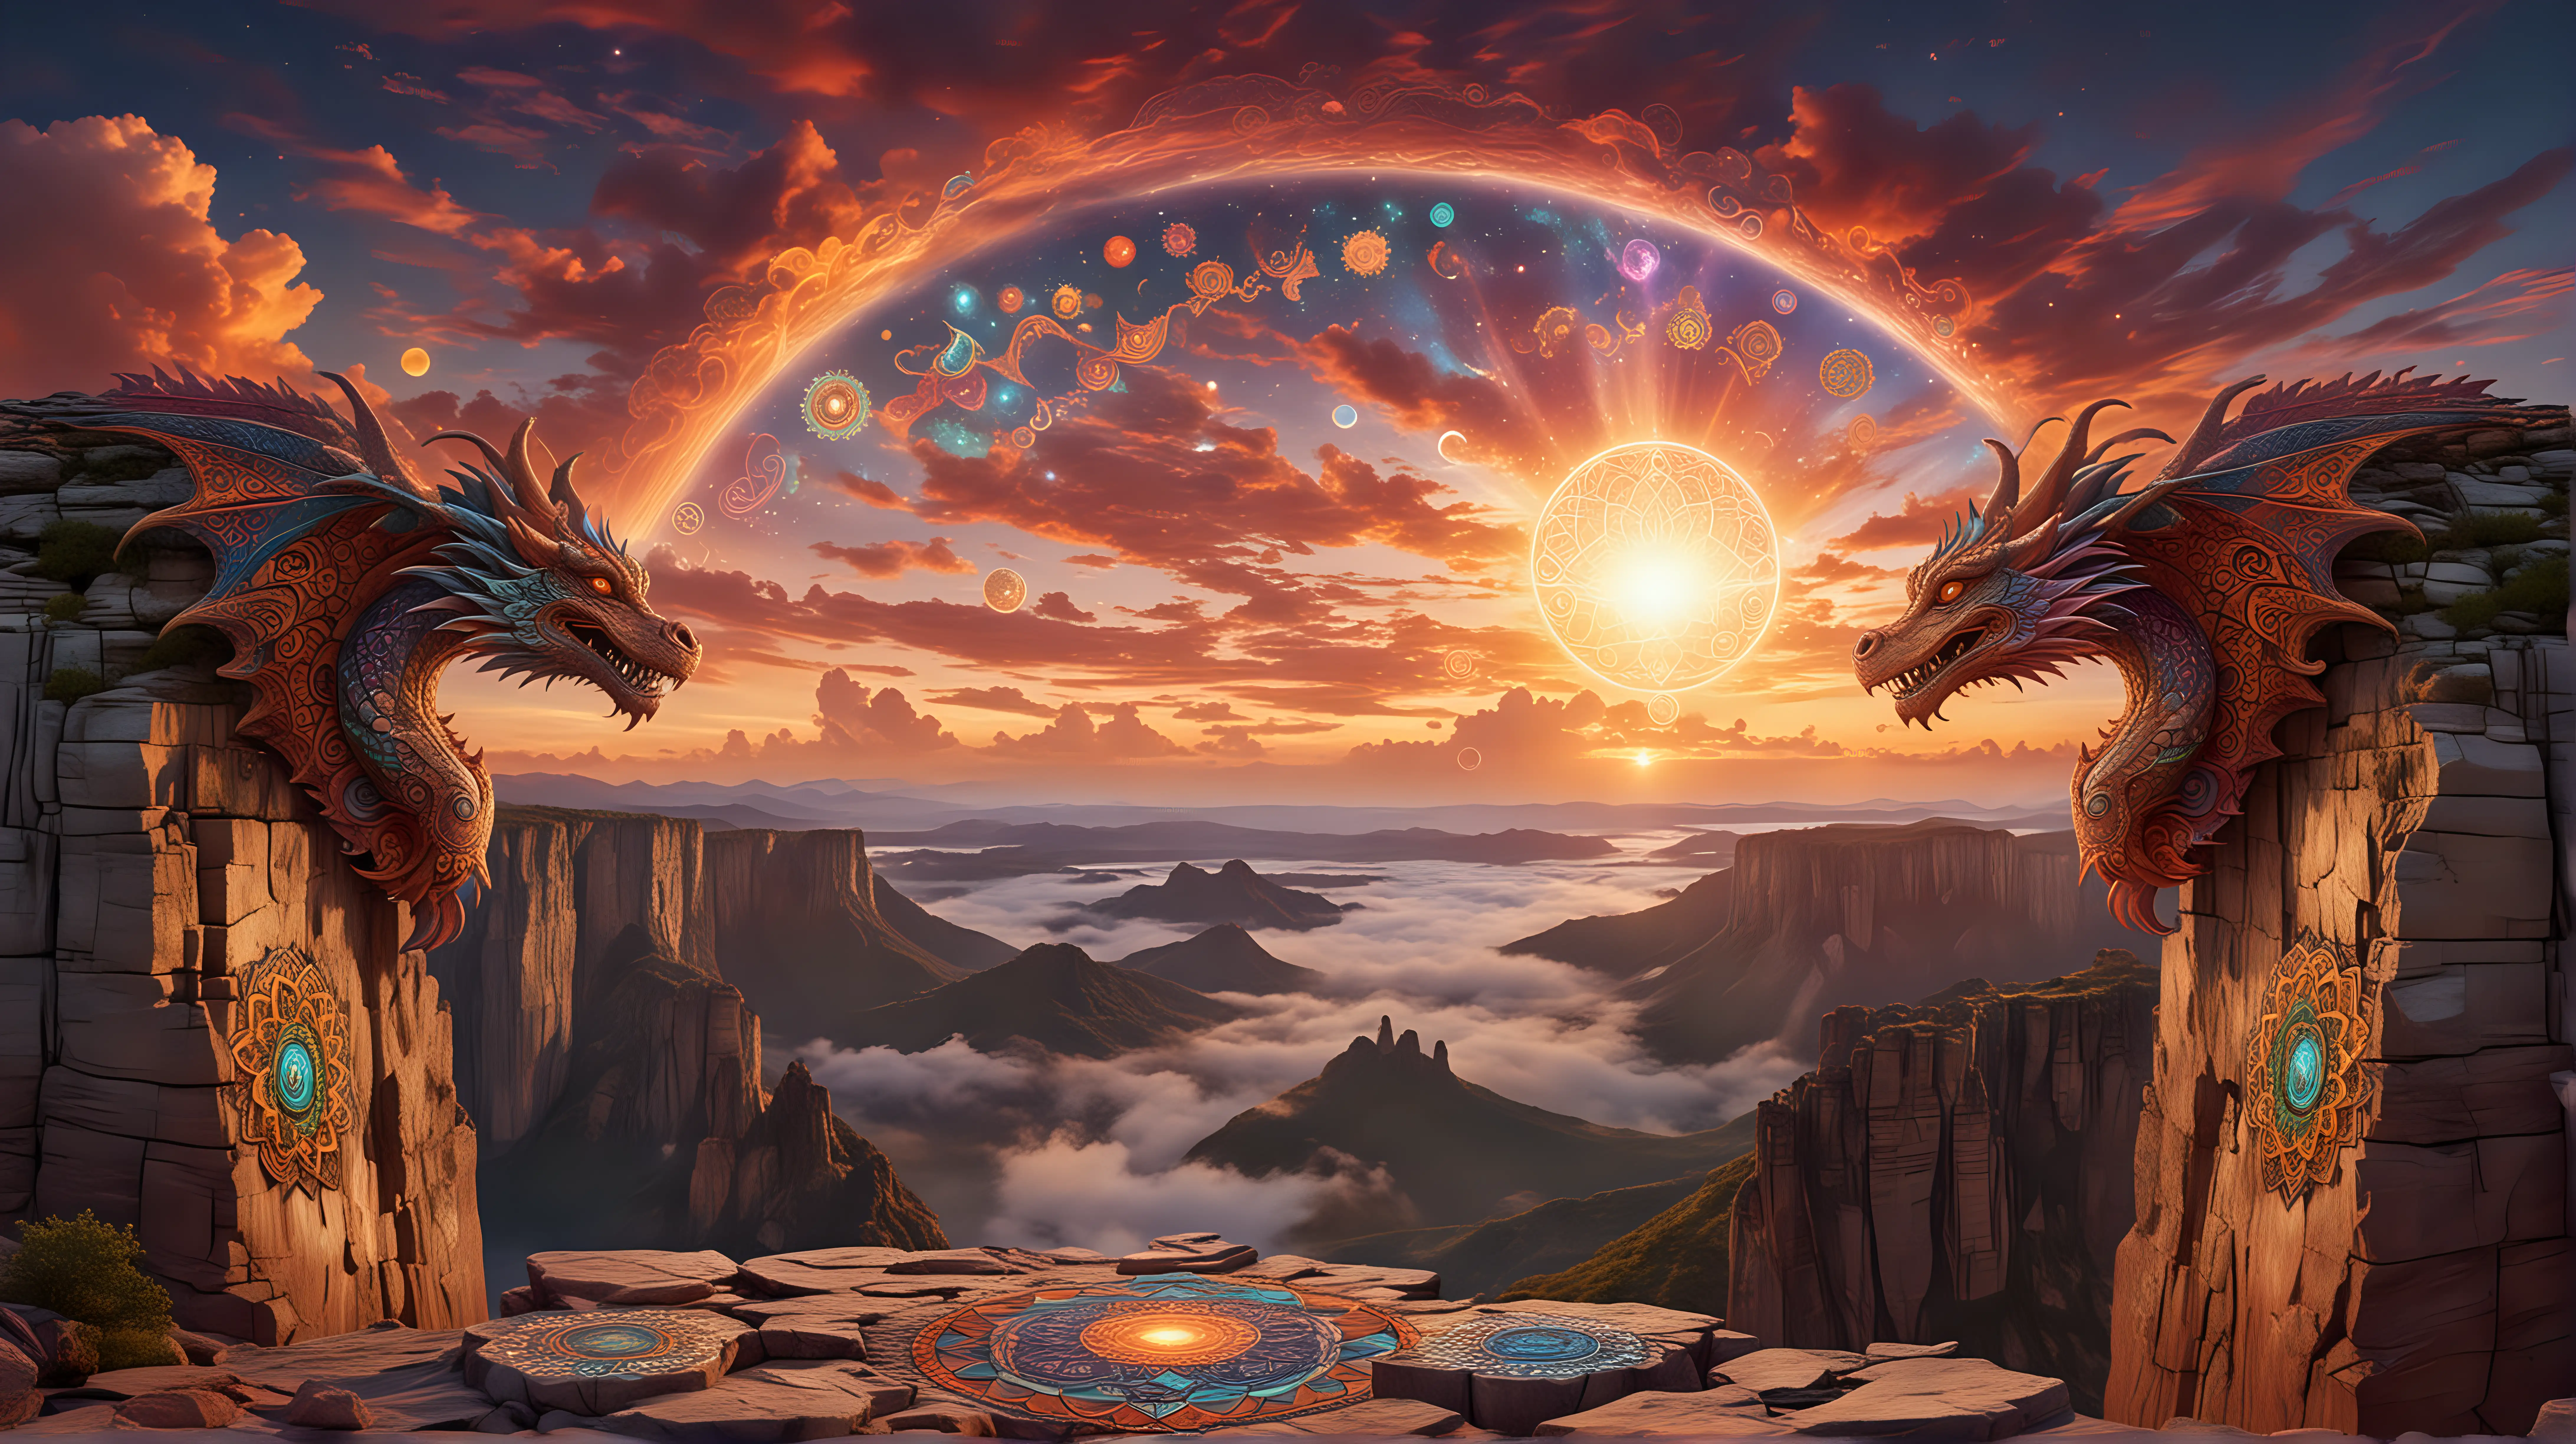 Psychedelic DMT visual on top of a scenic cliff on the edge of the universe at sunset with both the sun and moon visible. The clouds are shaped like dragons and there's 7 glowing chakra mandalas in the sky